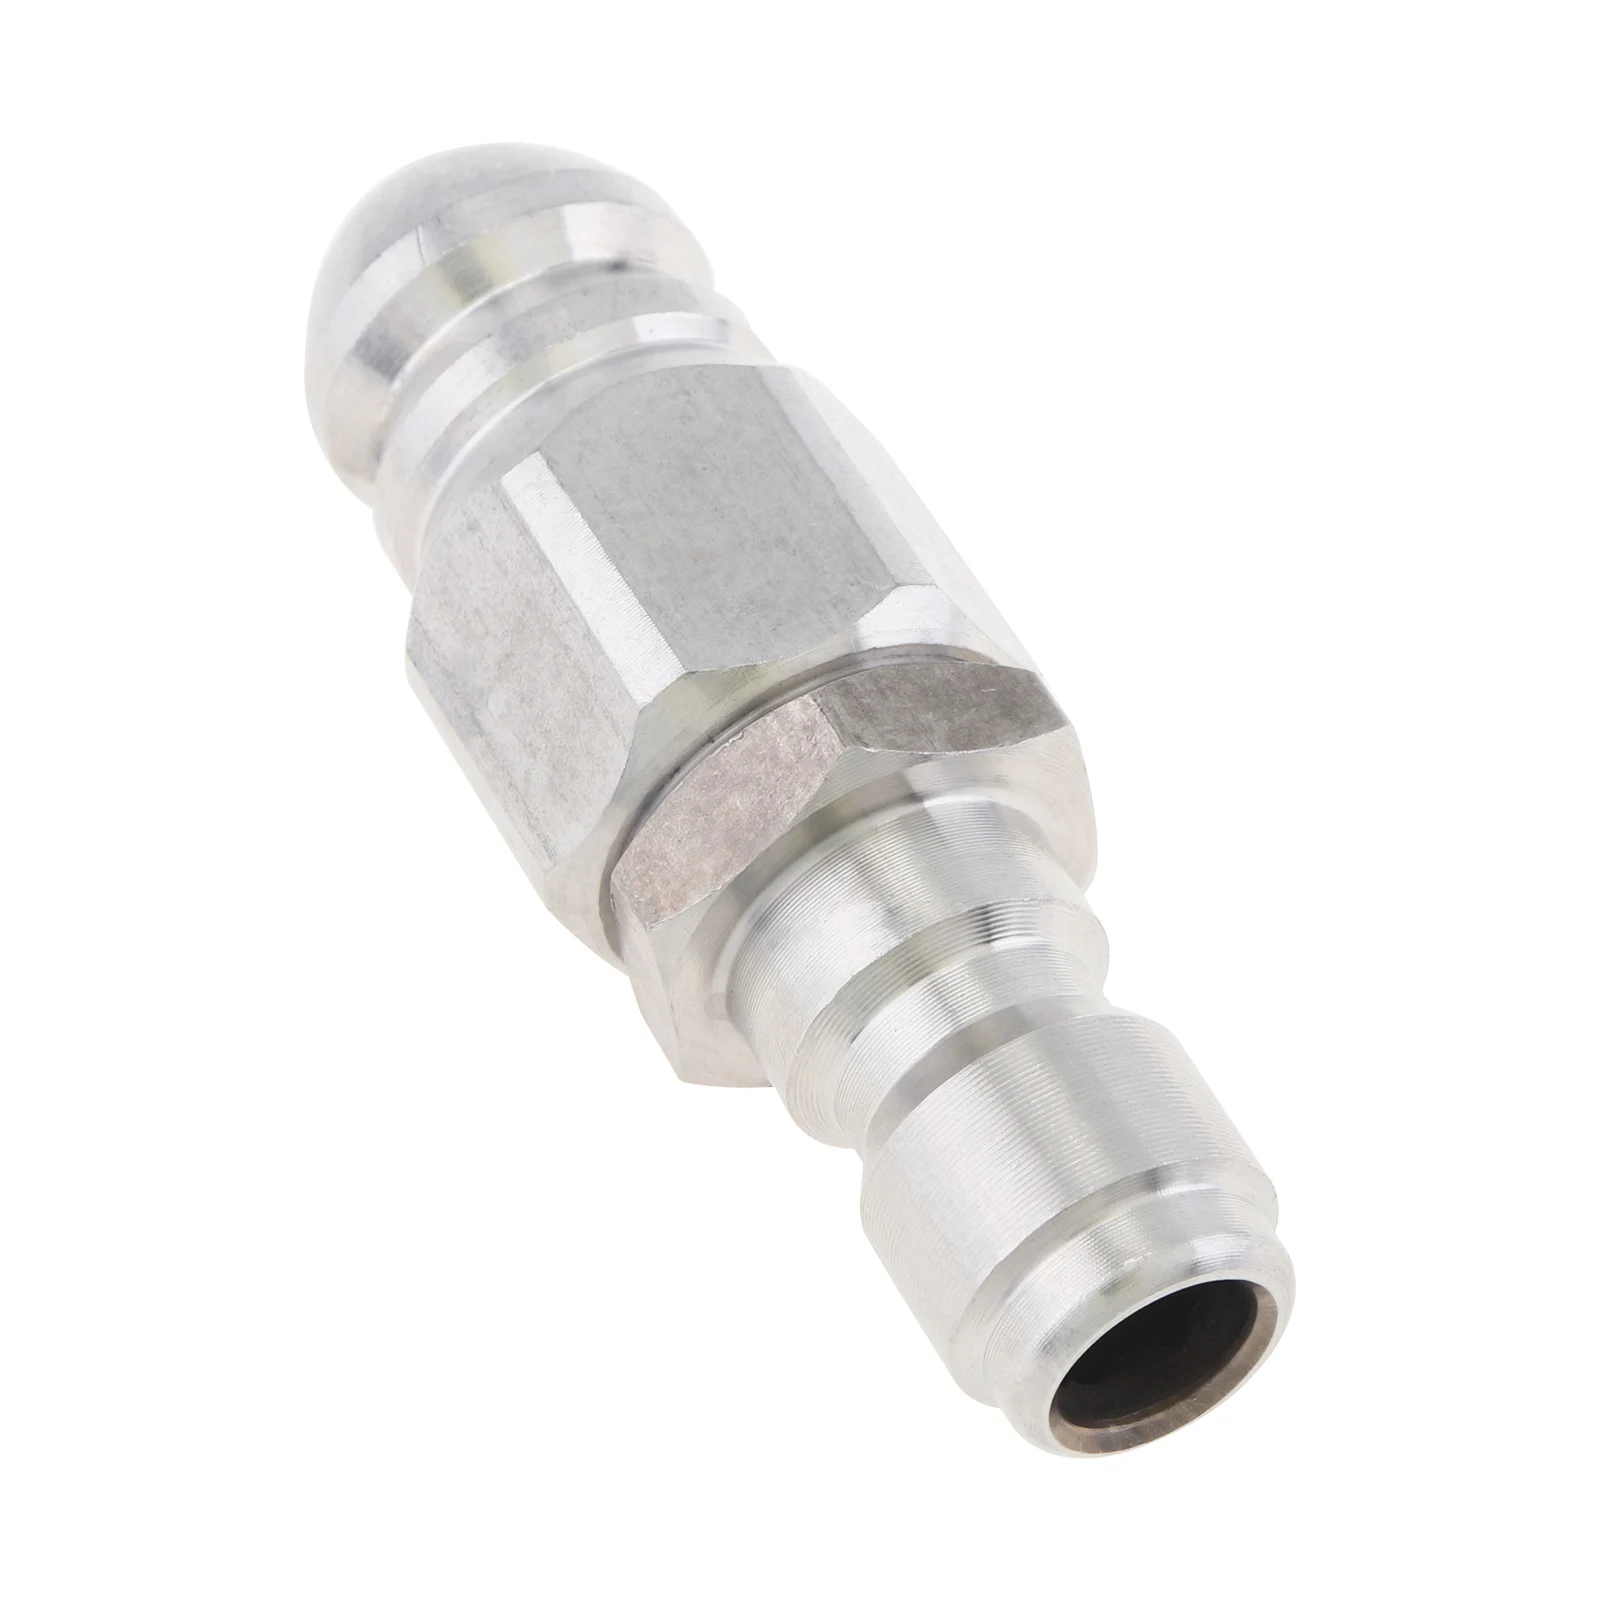 Pressure Washer Sewer Jetter Nozzle Mini Compact Quickly Connector for Drain Jetting Hose, Pressure Drain Jetter Hose Nozzle o ring for karcher lance hose nozzle spare o ring seal 2 640 729 0 o ring pressure washer for k2 k3 k4 k5 k6 k7